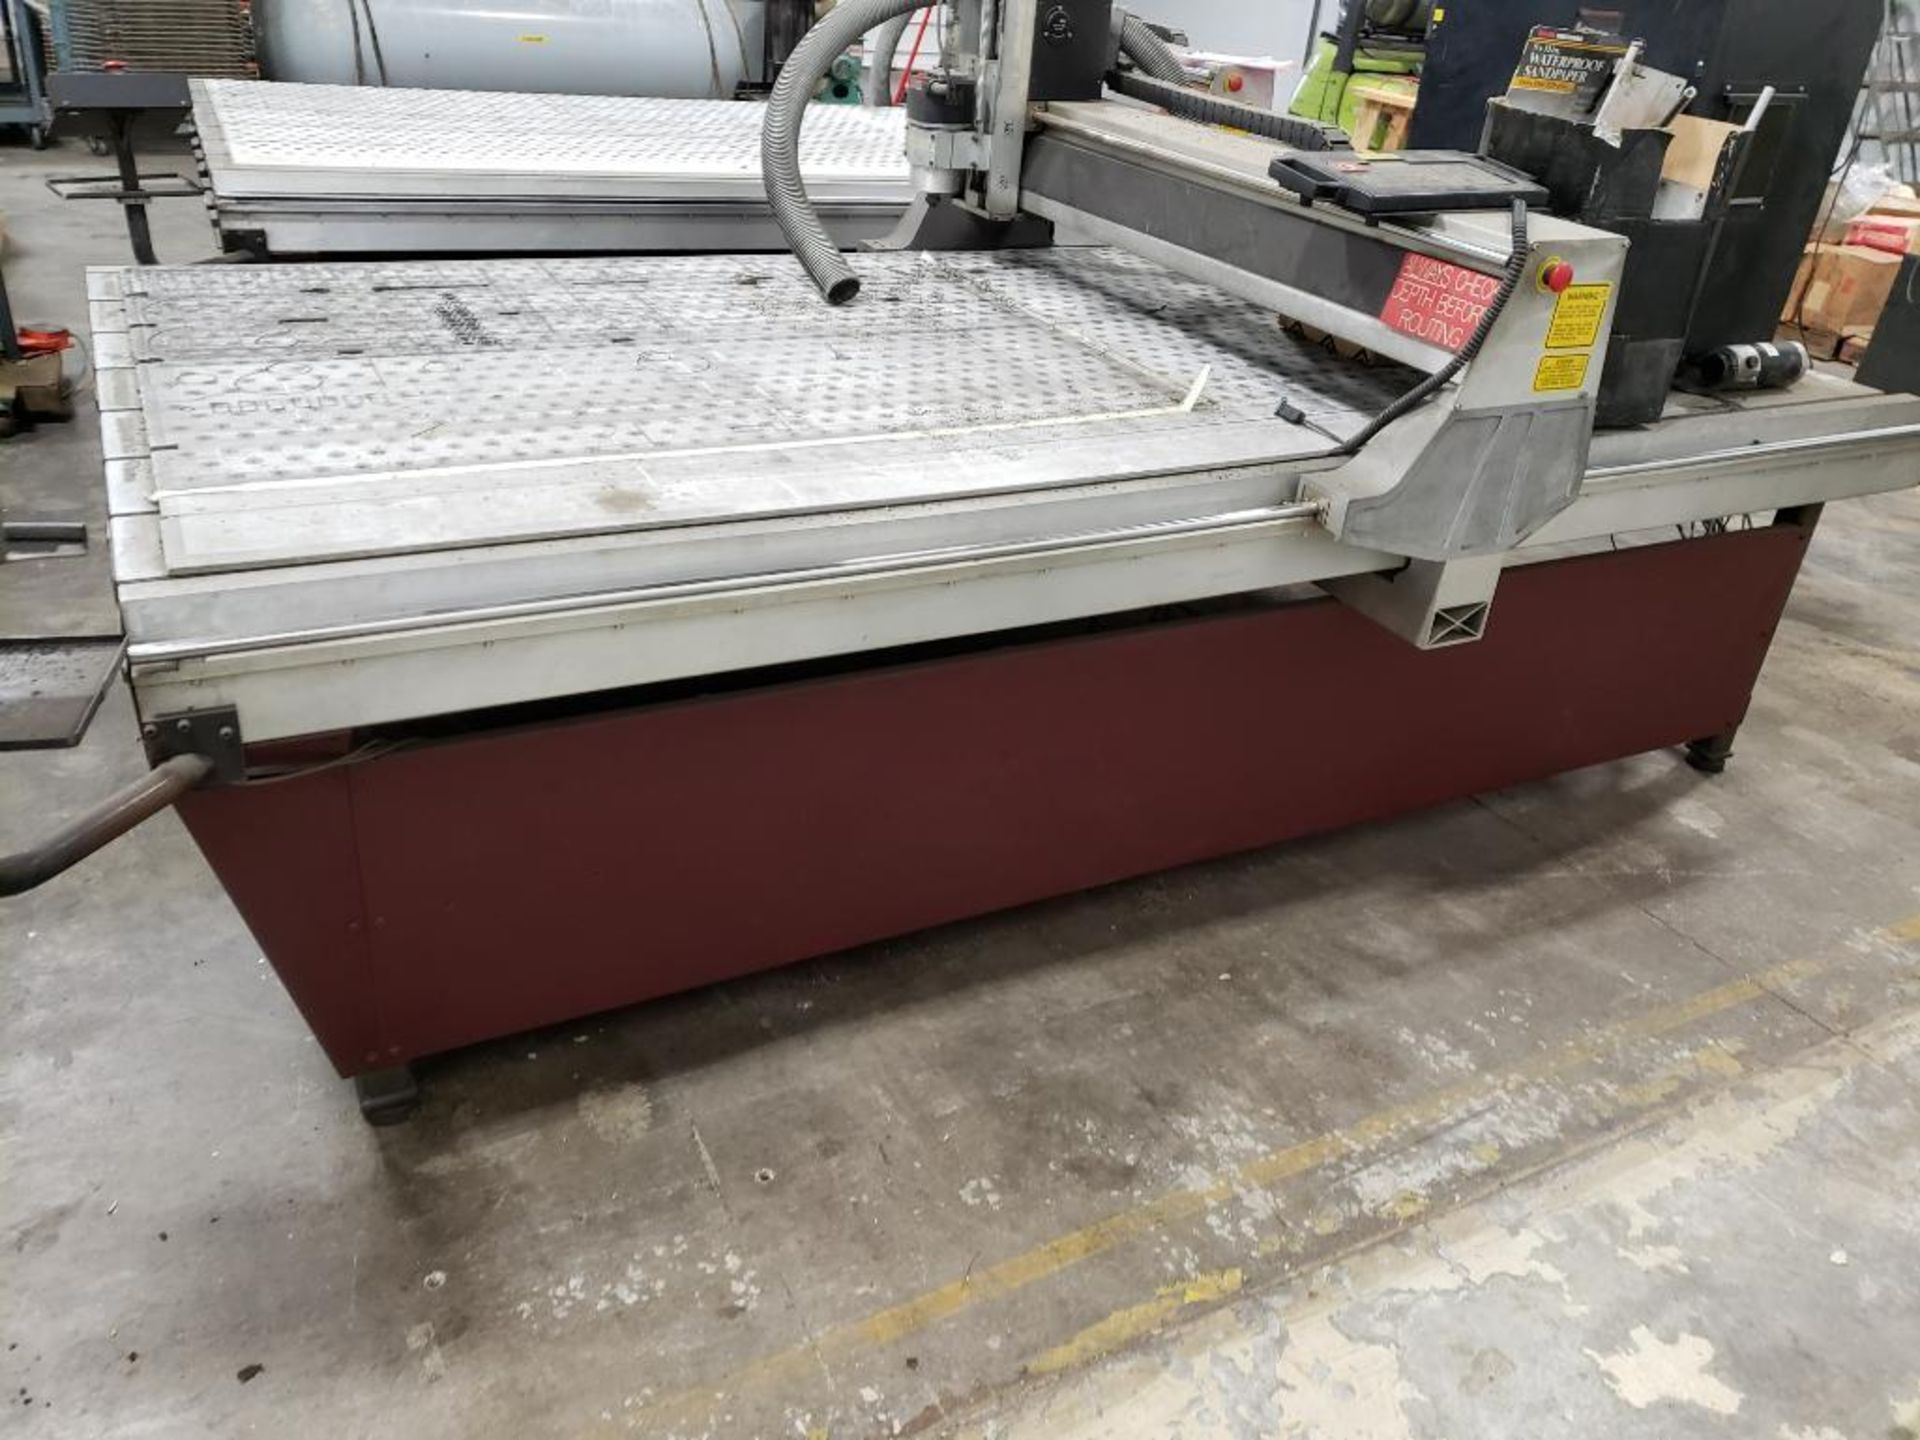 (Parts/Repairable) Gerber Sabre Model 408 CNC router. 54in x 121in table. 208-240v single phase. - Image 6 of 27